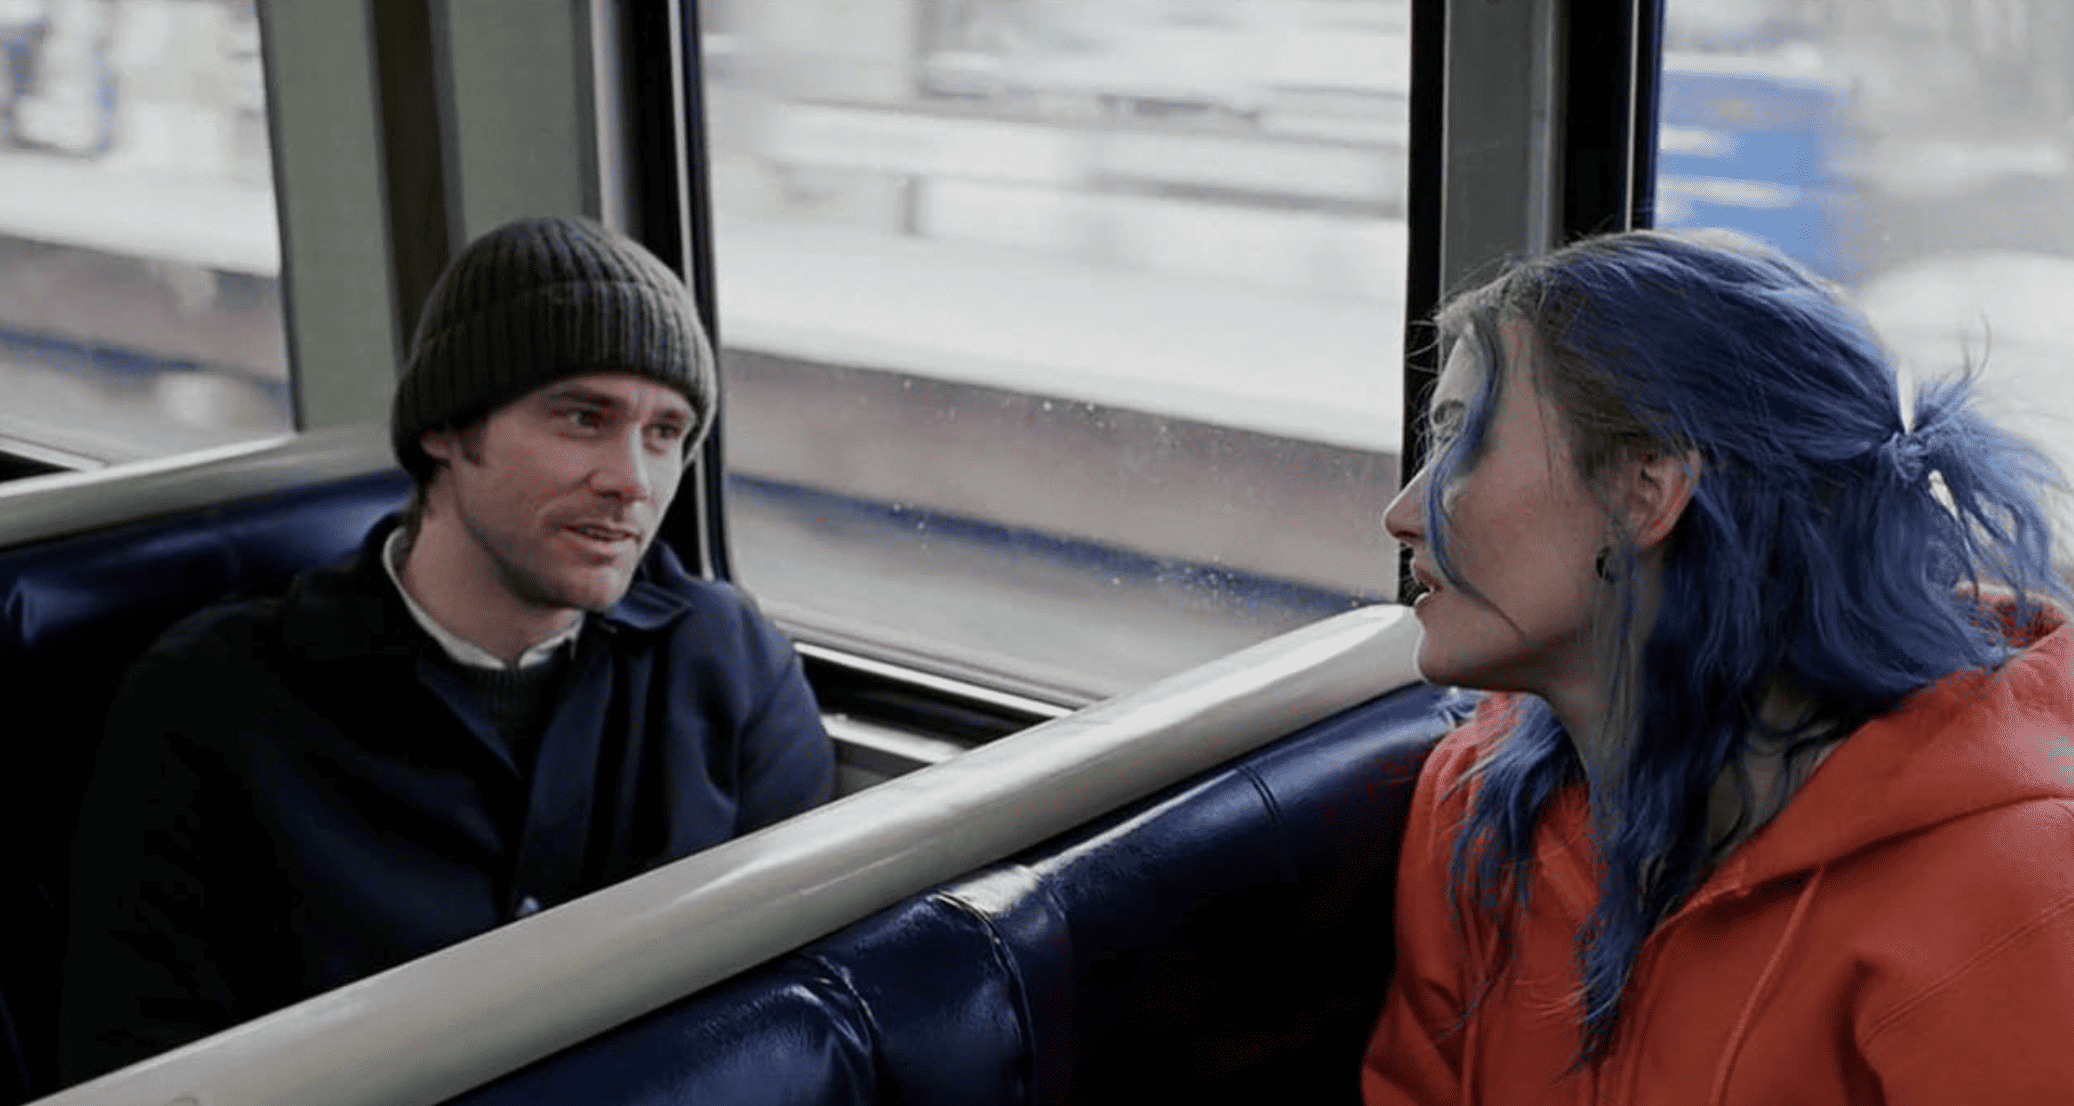 A man and a woman chat on the train in this image from Focus Features